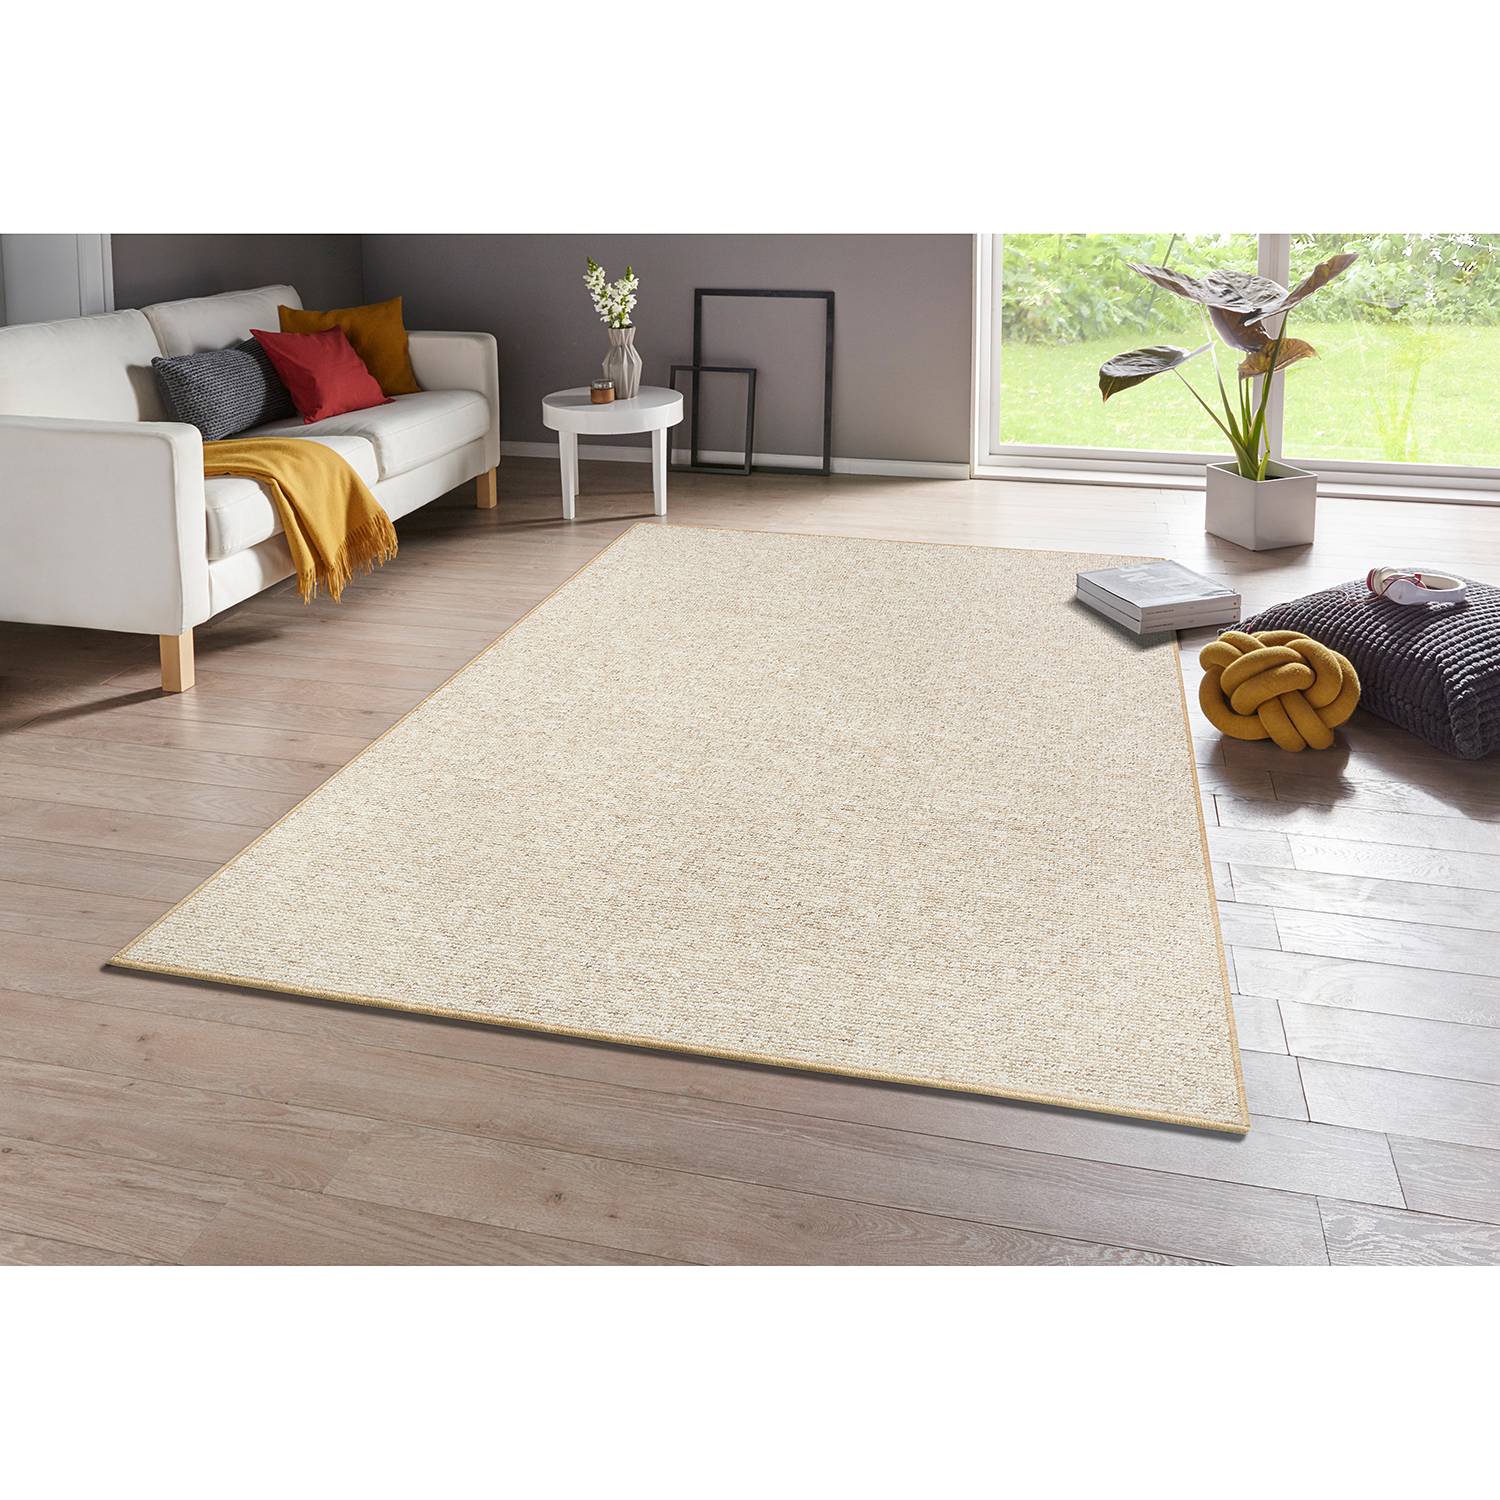 Image of Tapis Wolly II 000000001000275395